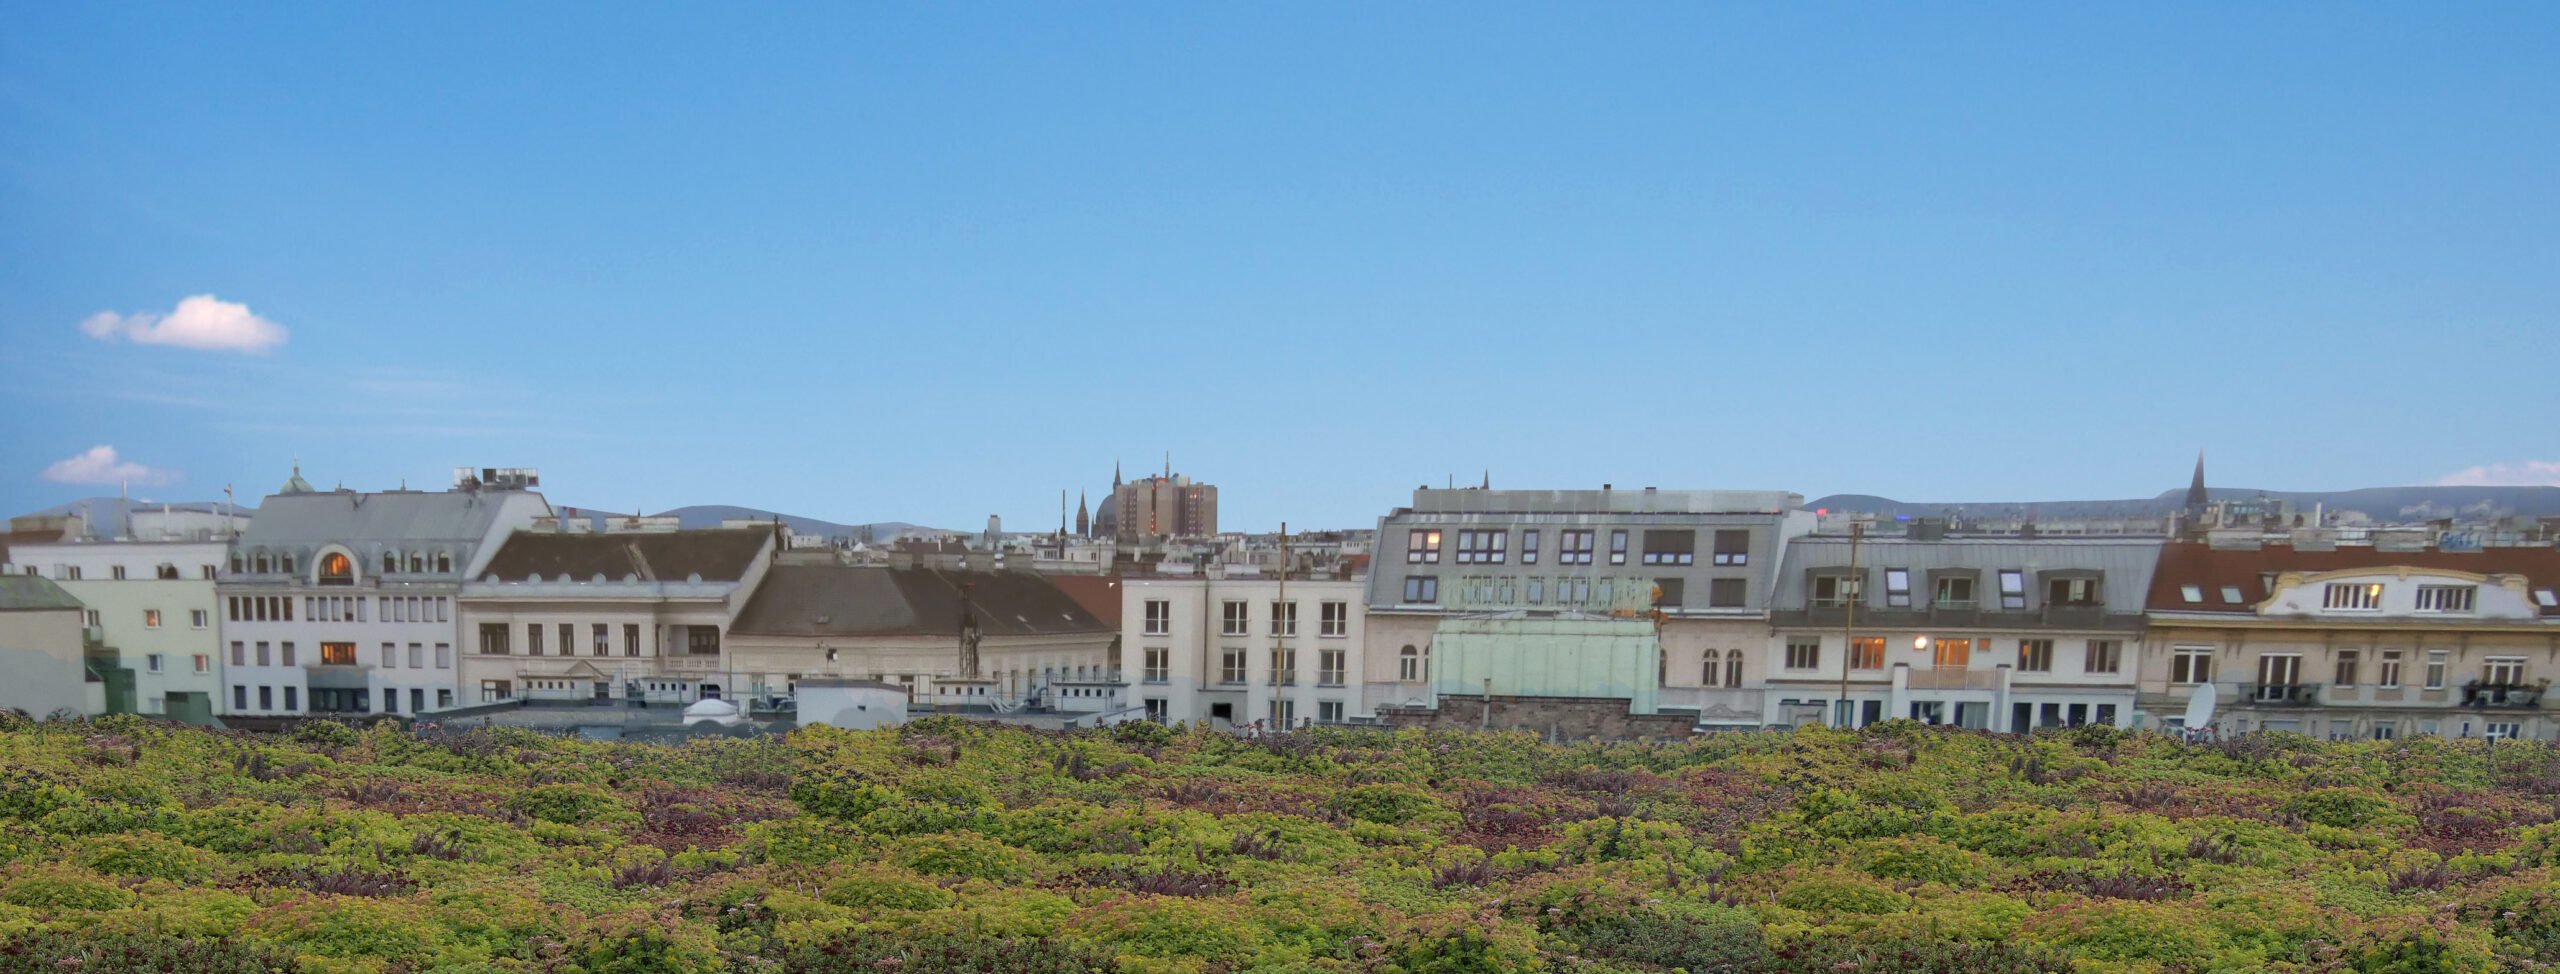 Improving the quality of life in cities with green roofs